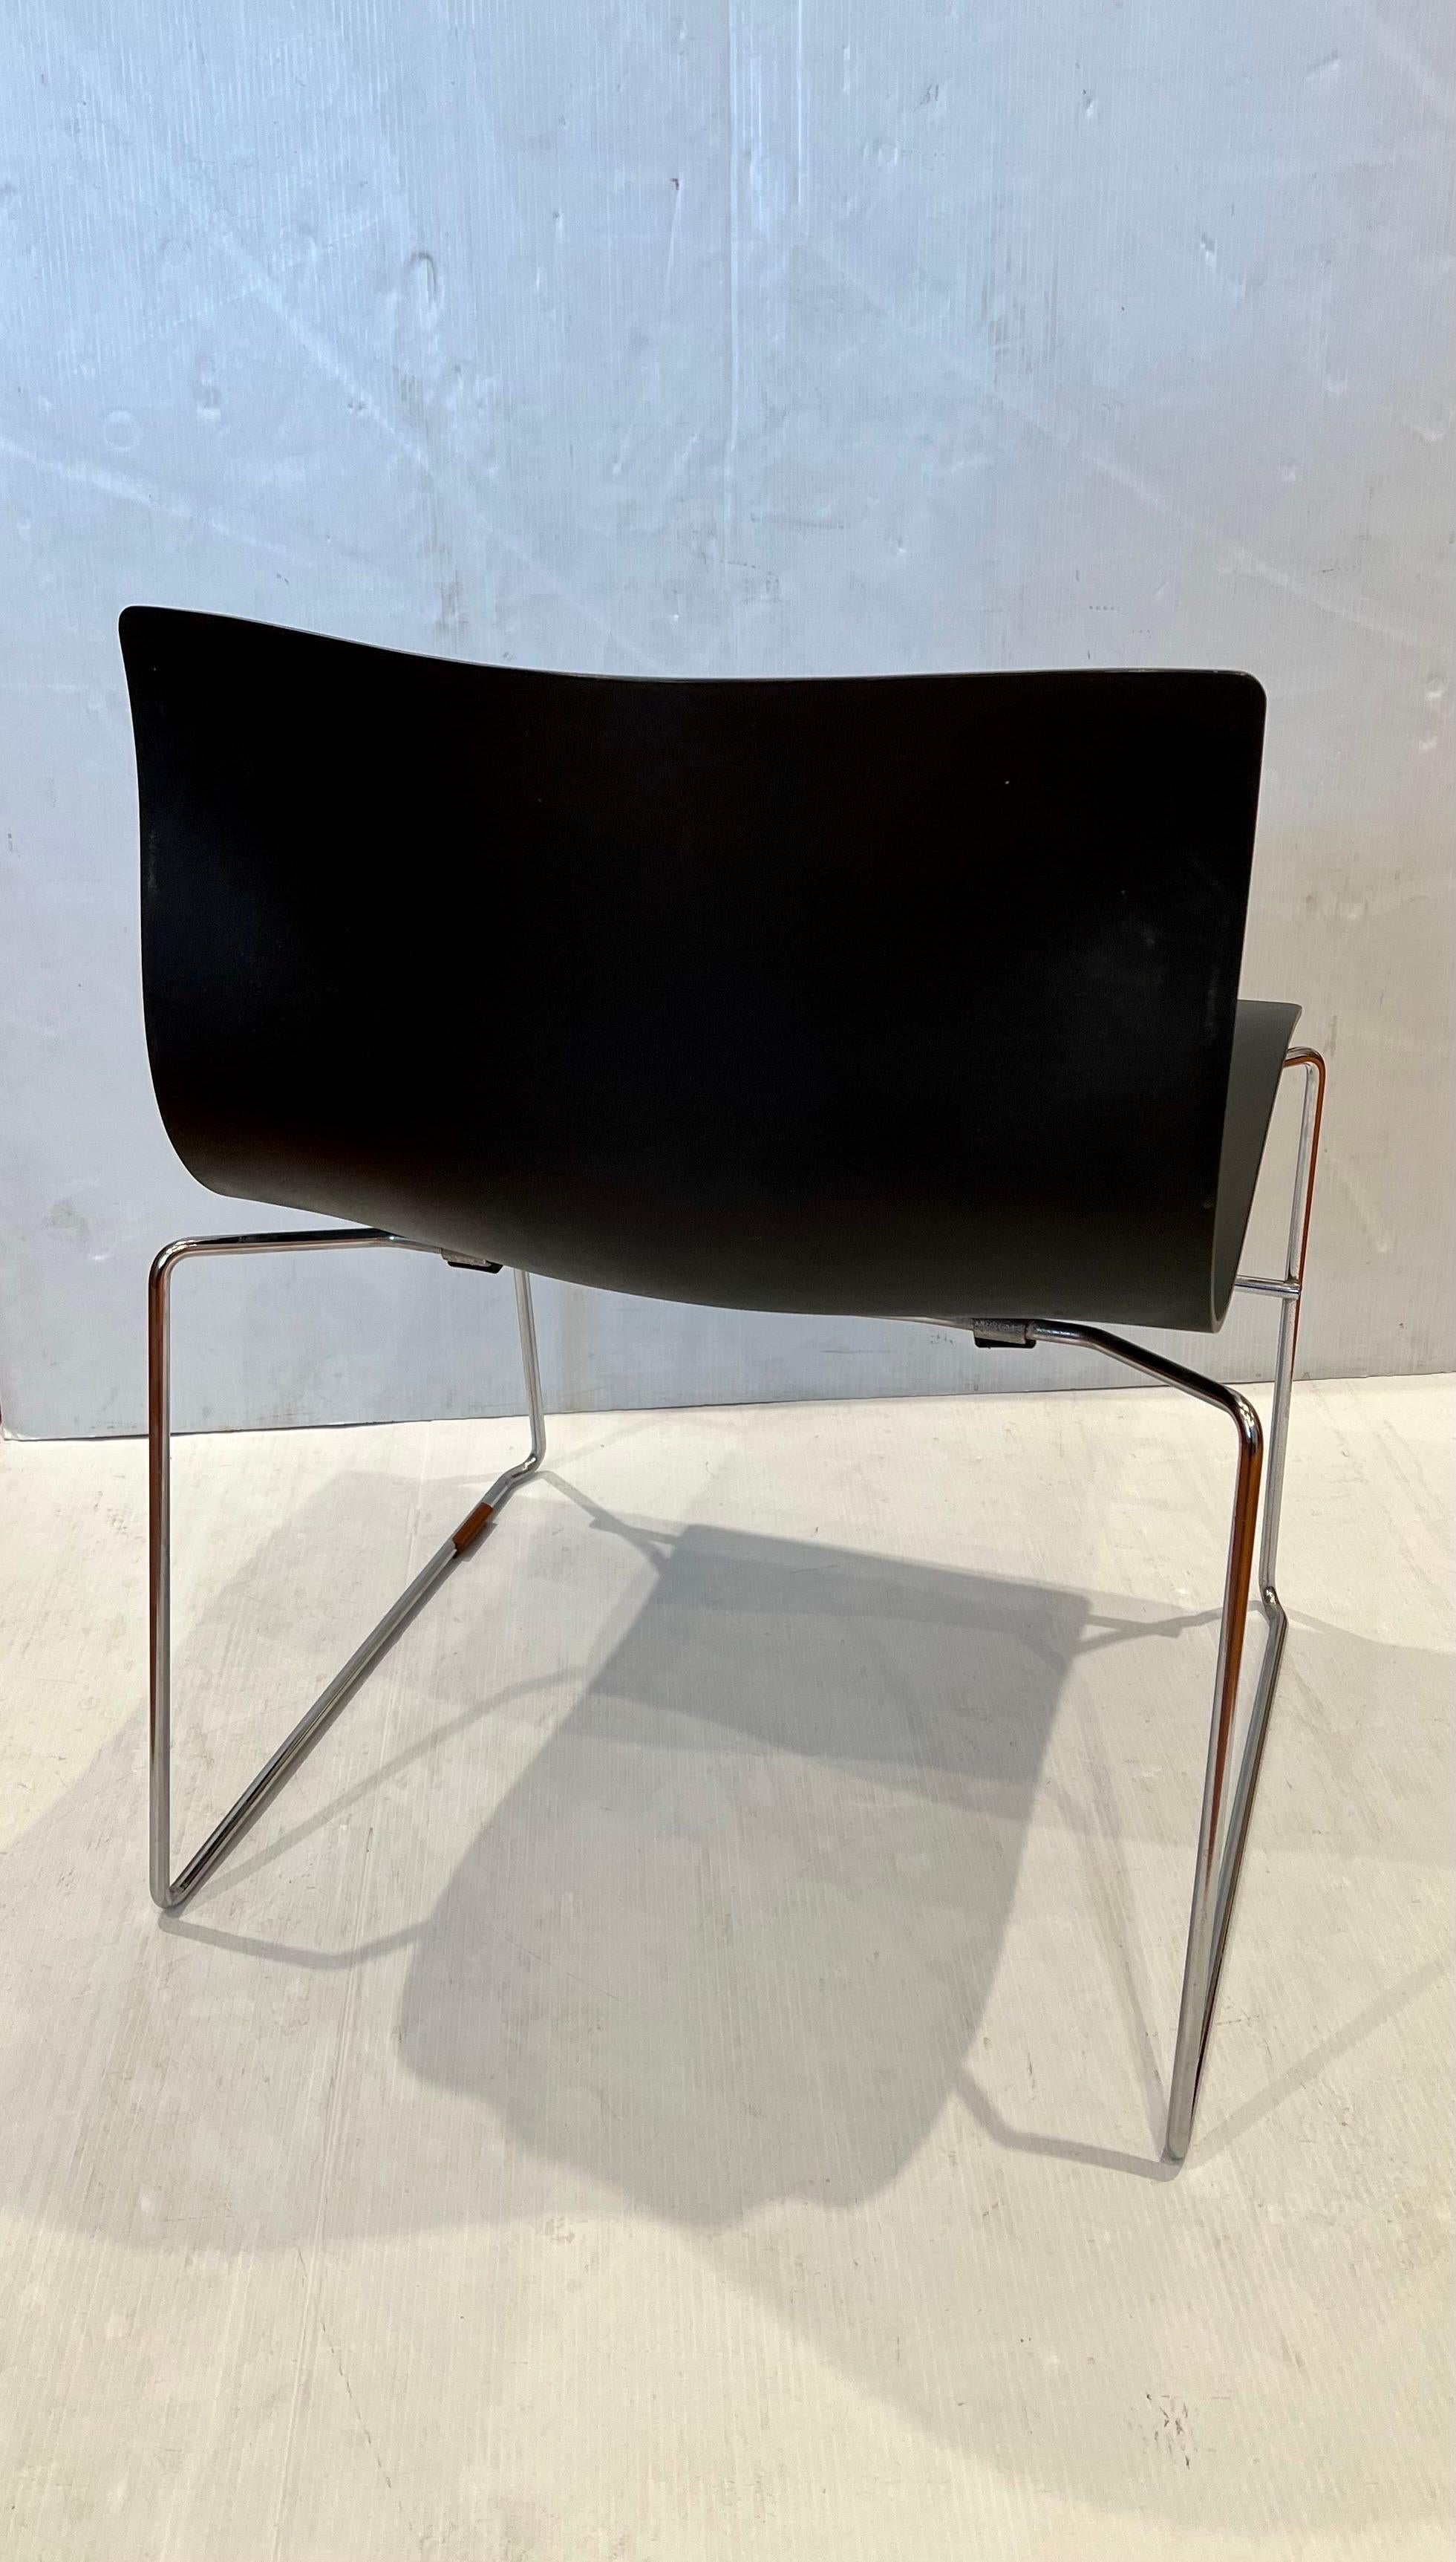 Set Handkerchief 4 Chairs in Black &Chrome Designed by Vignelli for Knoll Studio 1